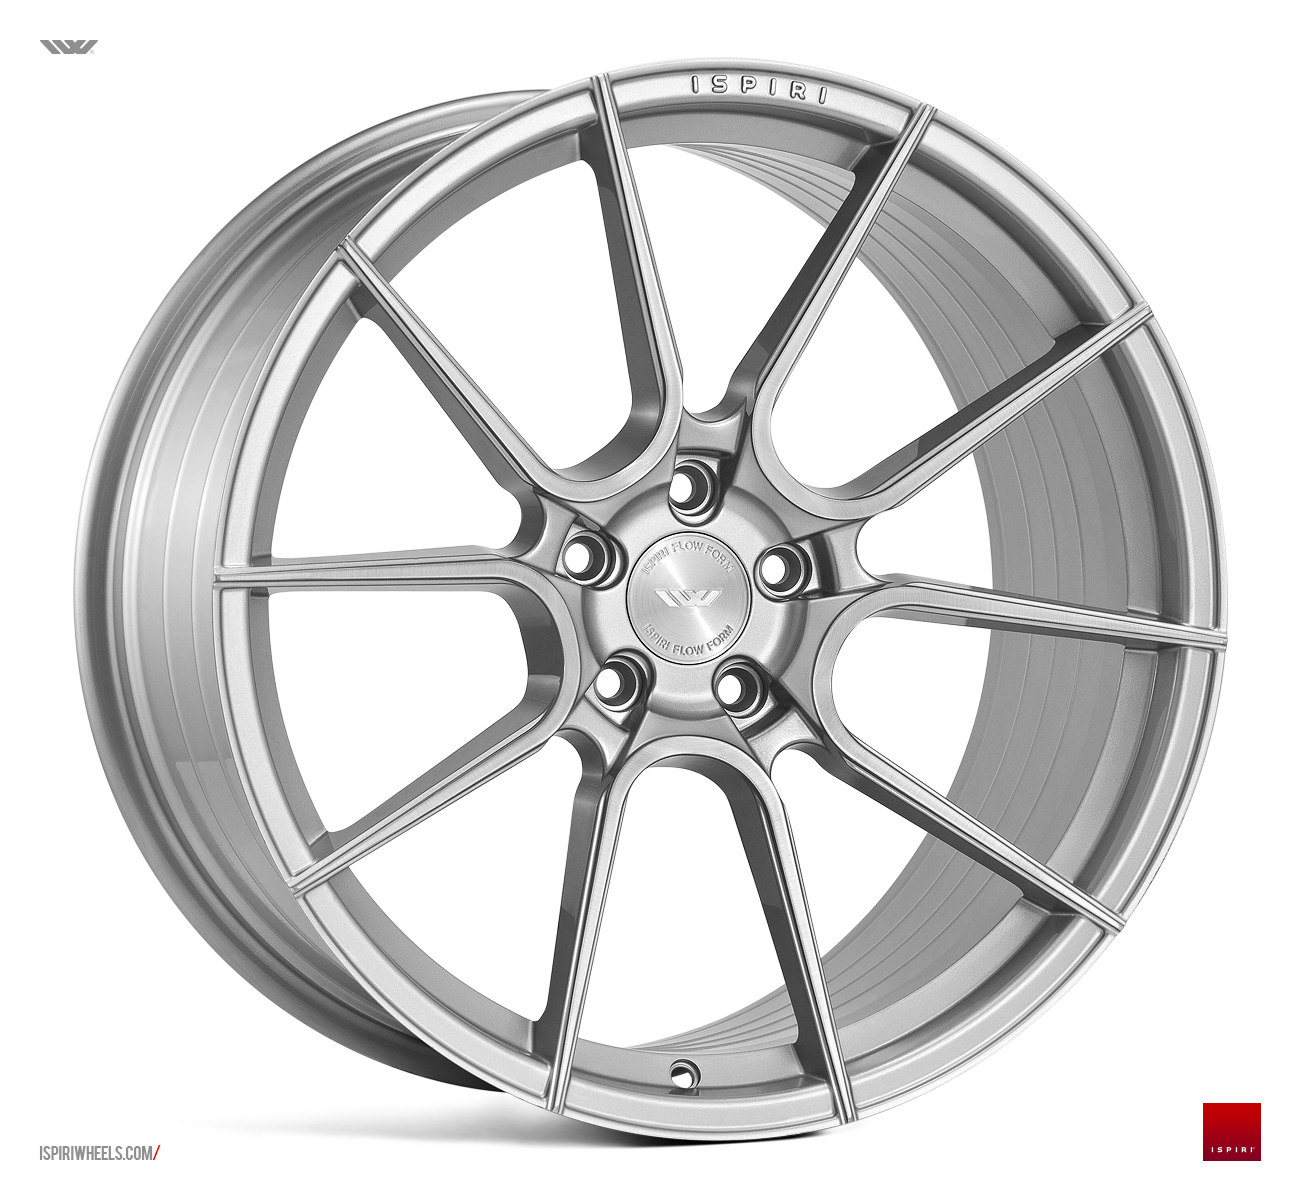 NEW 20" ISPIRI FFR6 TWIN 5 SPOKE ALLOY WHEELS IN PURE SILVER BRUSHED, VARIOUS FITMENTS AVAILABLE